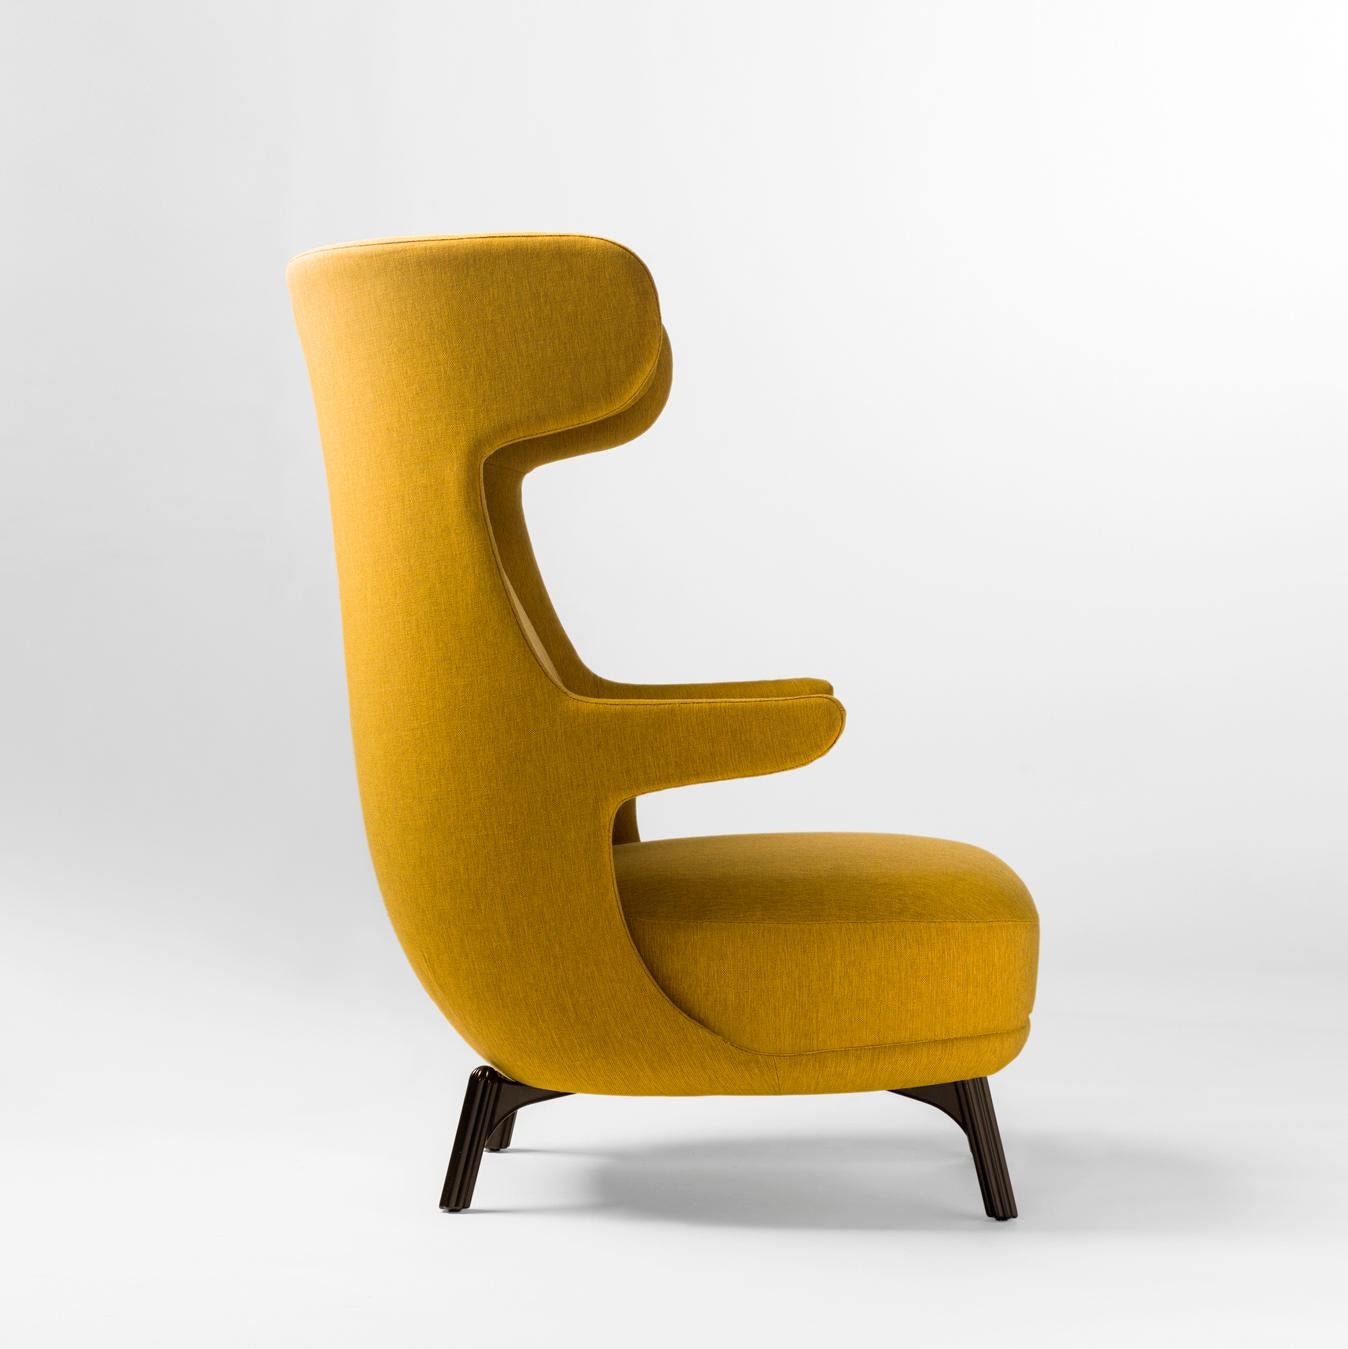 Armchair designed by Jaime Hayon in 2019.
Manufactured by BD in Spain.

The Dino armchair that would be as comfortable as possible within certain dimensions, so that they adapt well to the body and space it’s in, for both the home and contract.